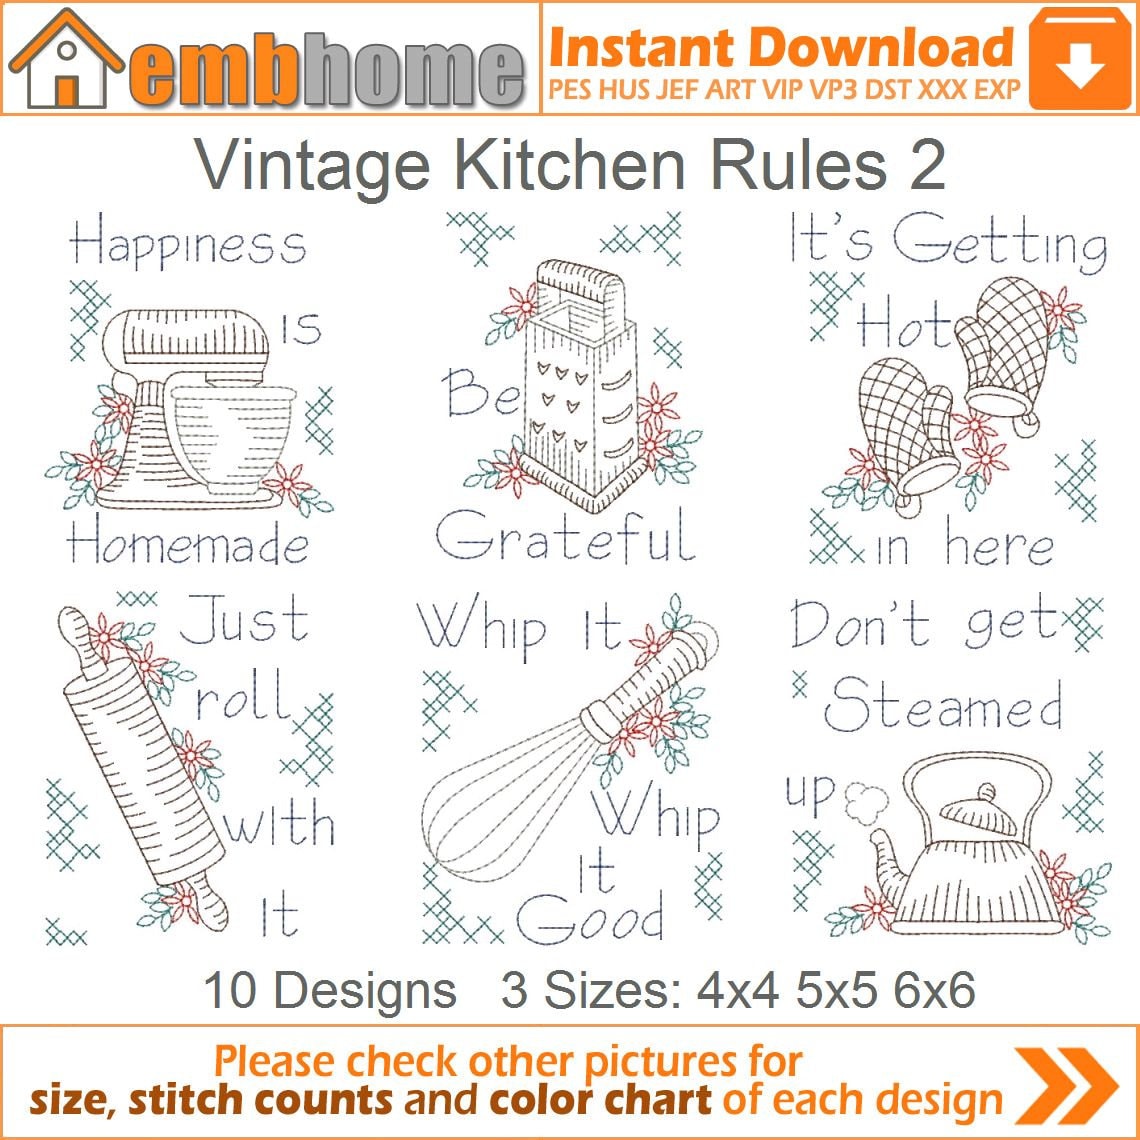 Vintage Kitchen Rules Machine Embroidery Designs Instant image photo